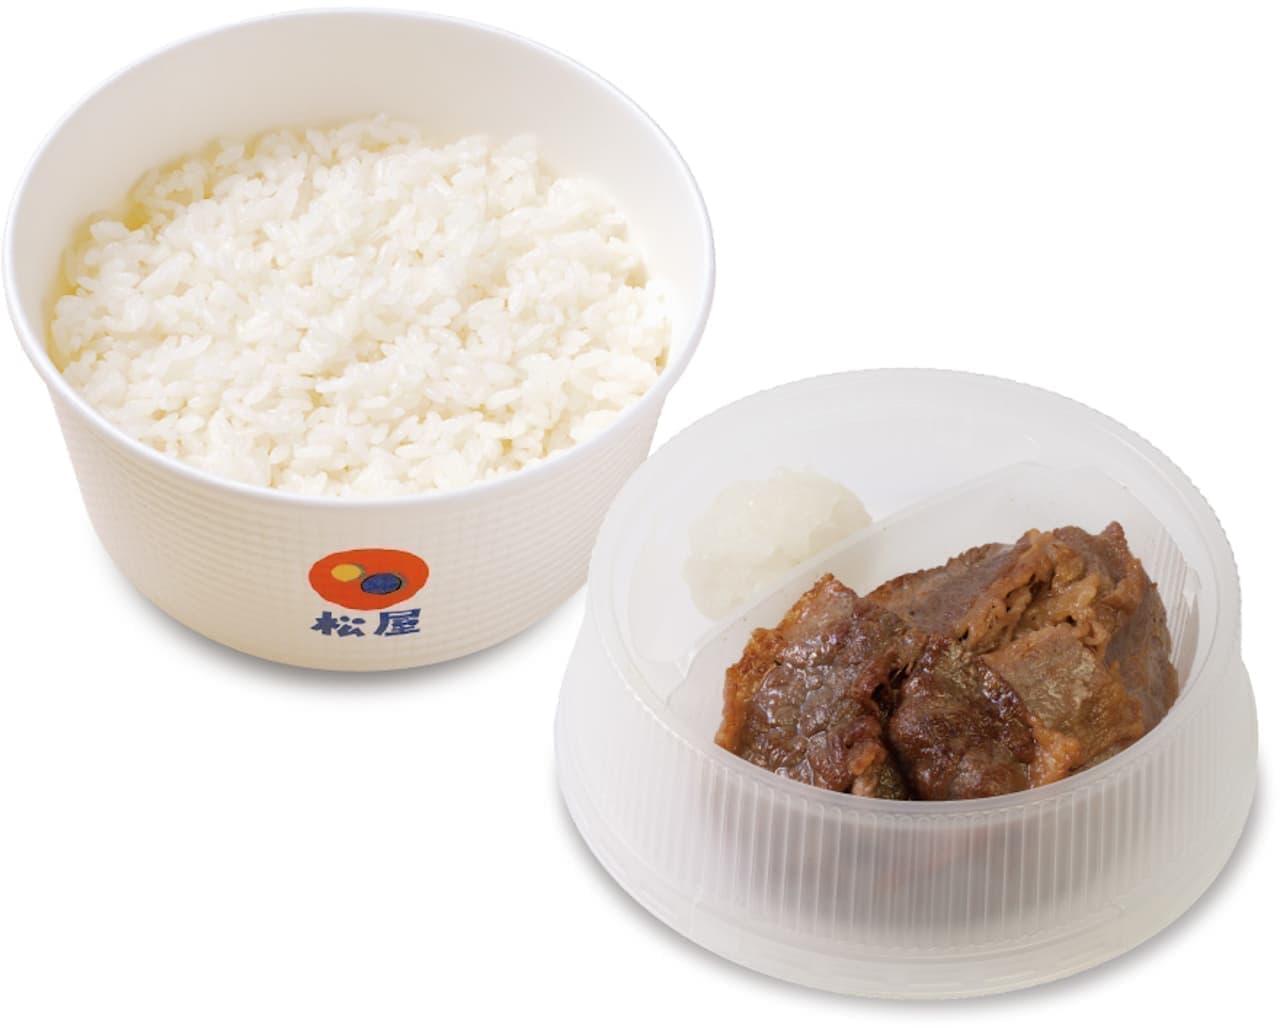 Matsuya's popular set meal is now a To go limited "don"